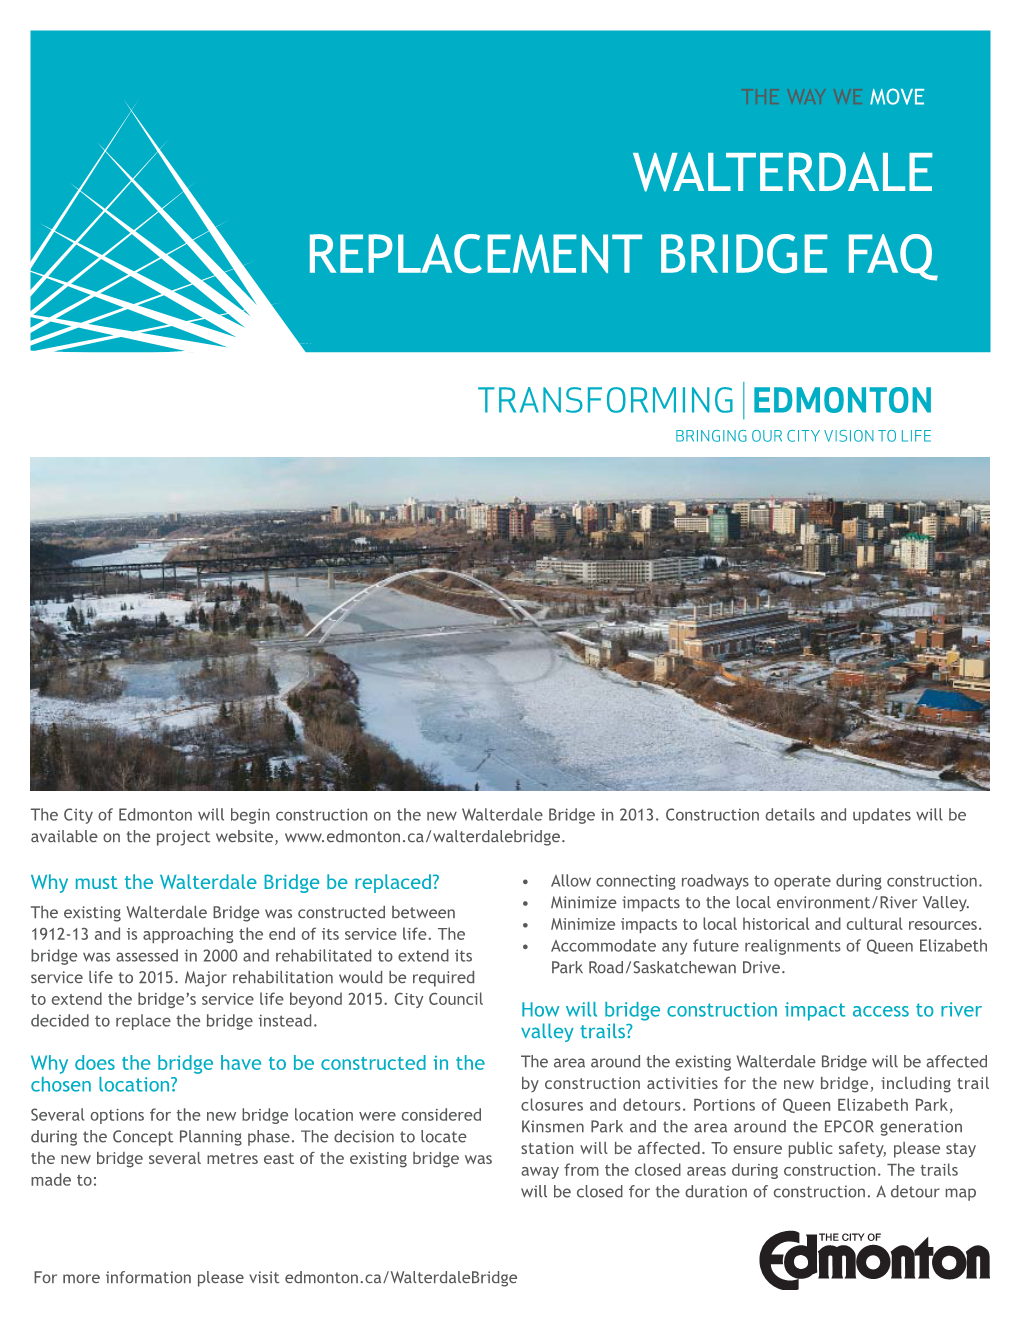 Walterdale Bridge Replacement Project, It Is Not Possible to Could Possibly Create